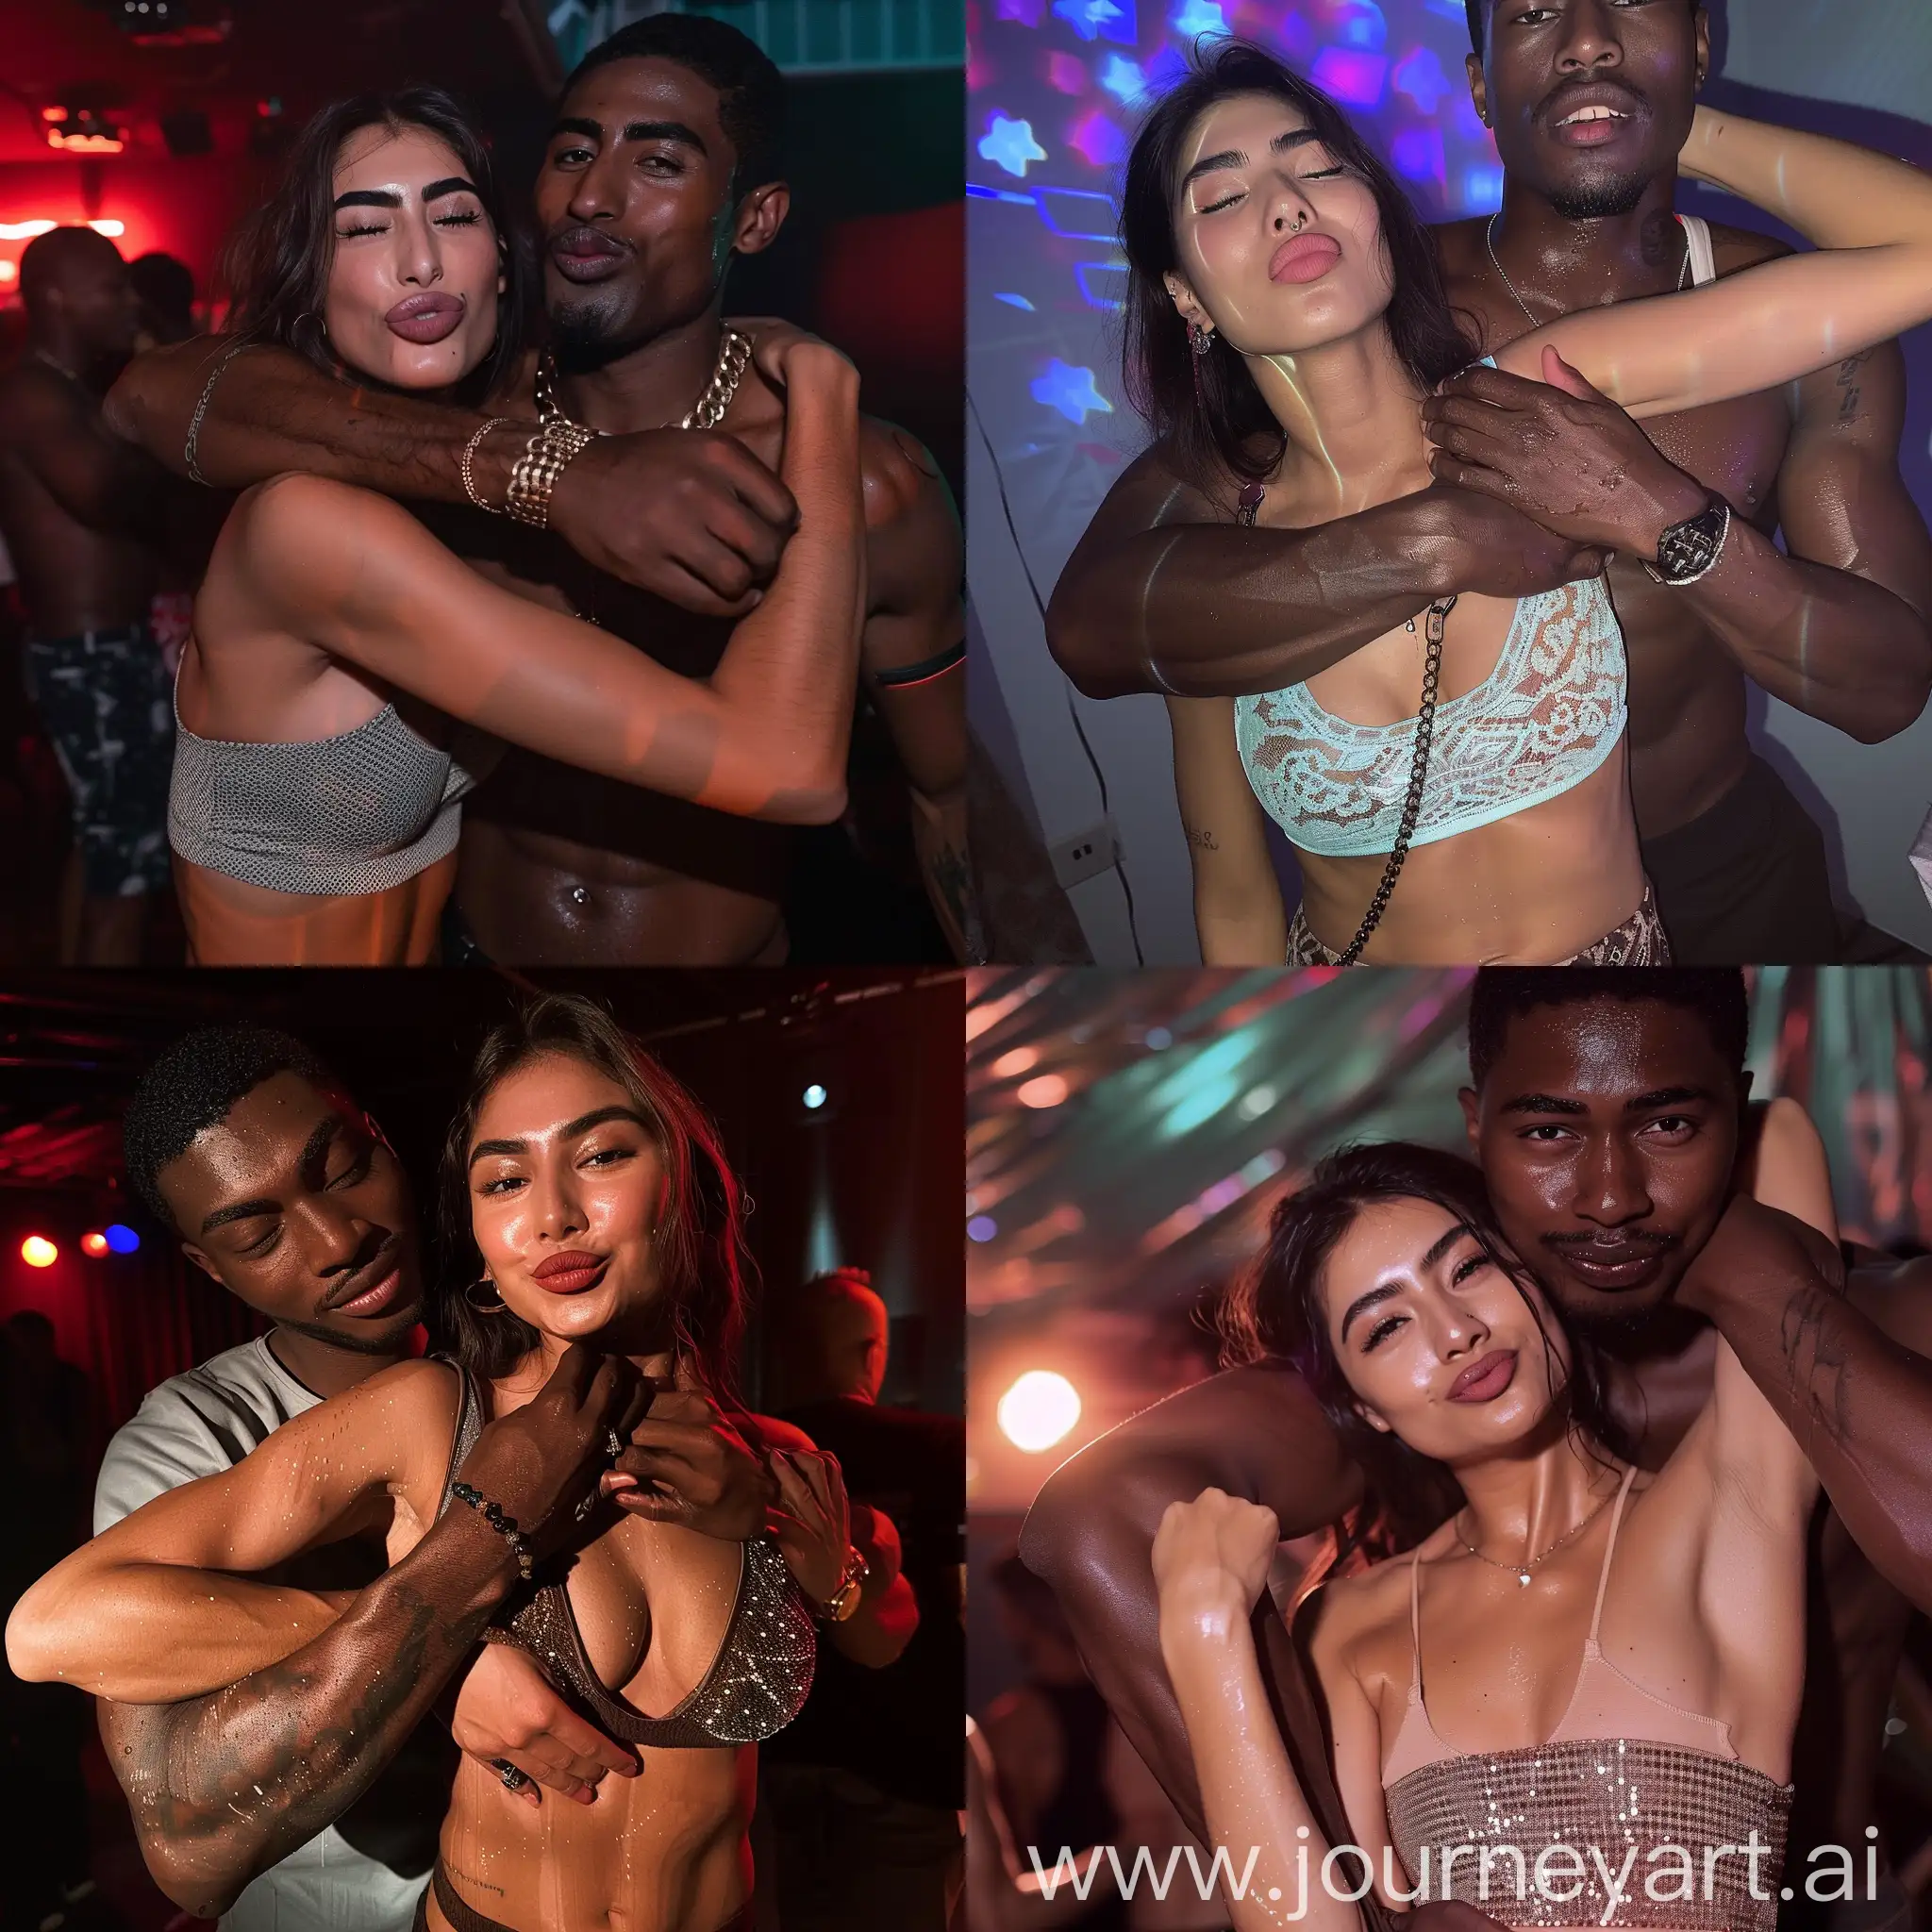 Aesthetic instagram selfie of a persian woman in a party club crop-top getting hugged possessively by her tall robust african partner, she is doing the duck lips pose, her partner is grabbing her neck and smiling, the woman looks typically persian and is beautiful, both are looking at the camera, sweaty, flirty 